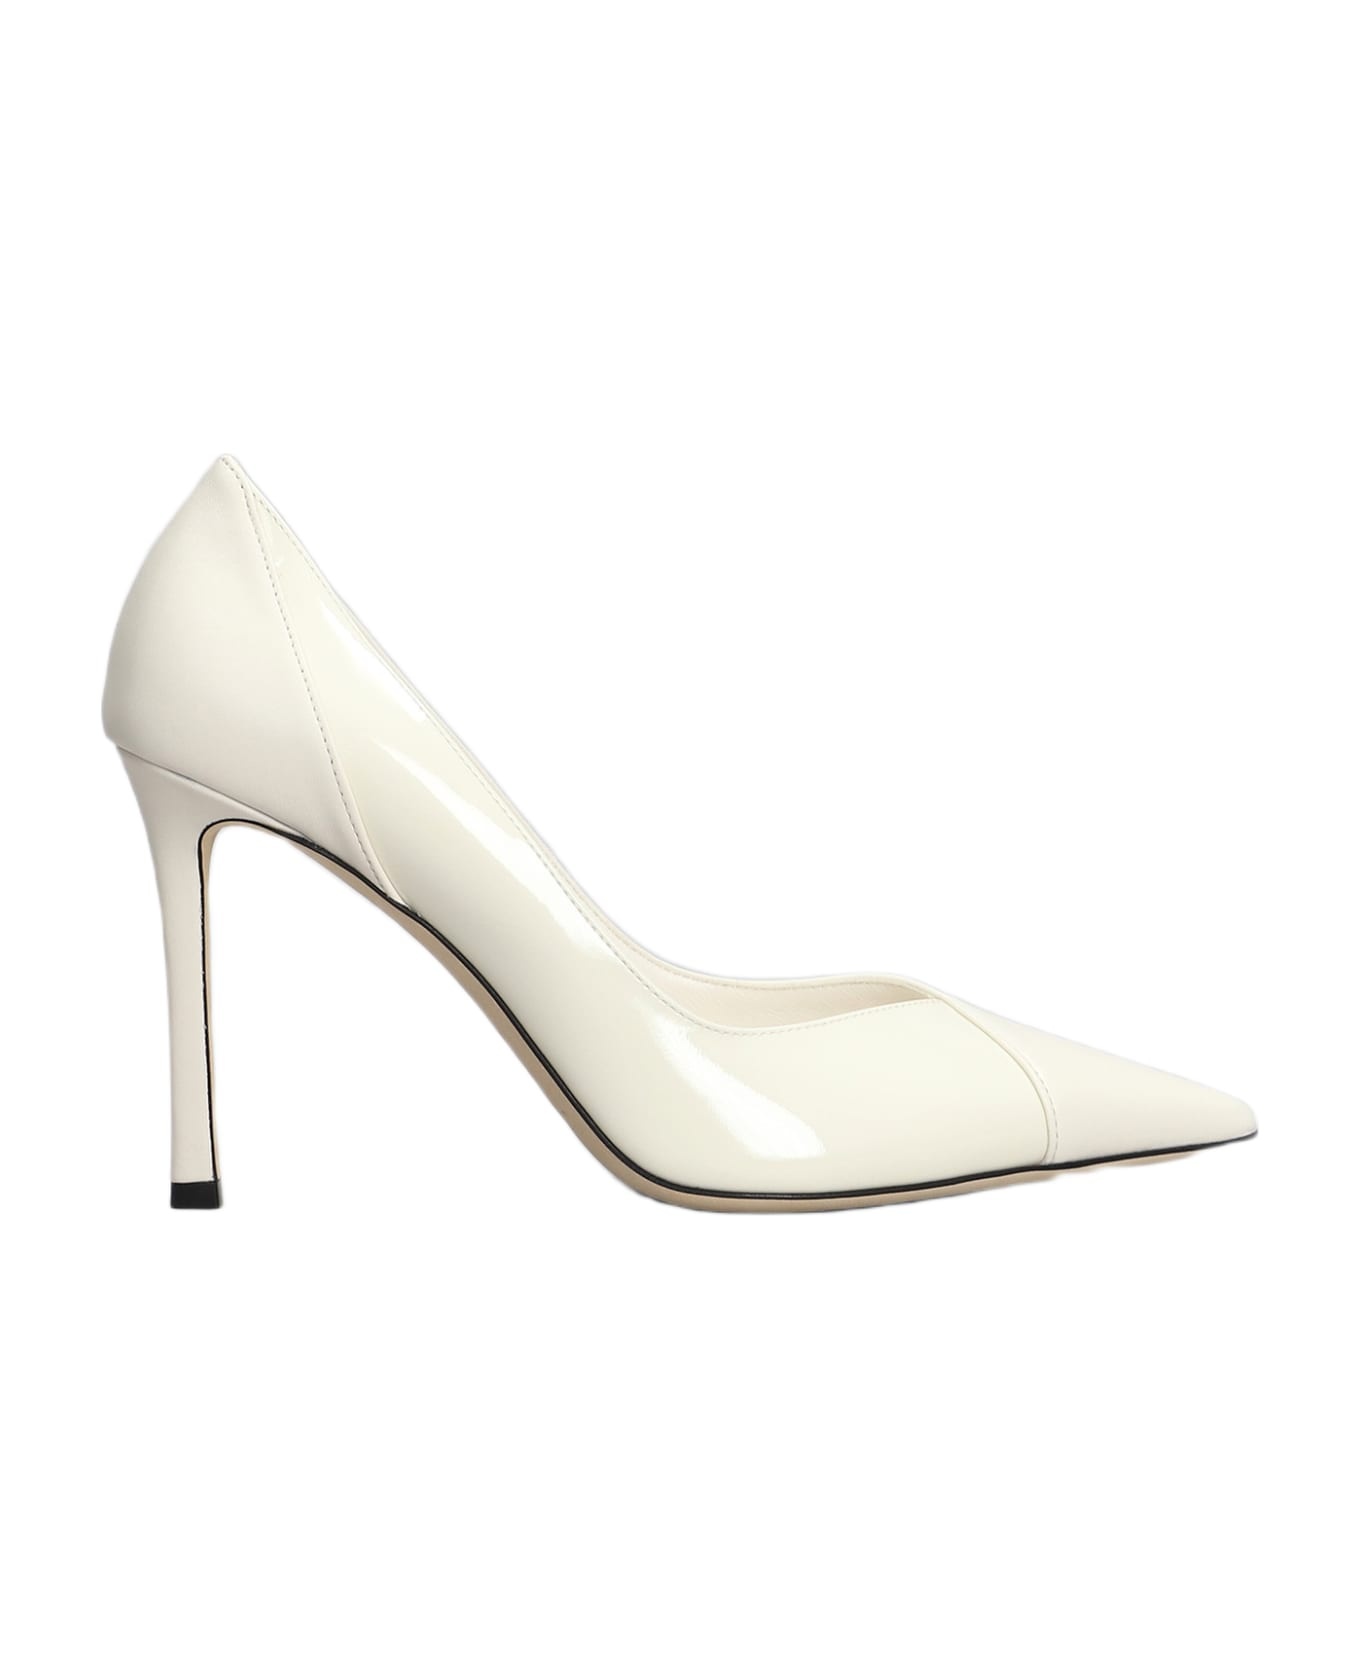 Cass 95 Pumps In Beige Patent Leather - 1